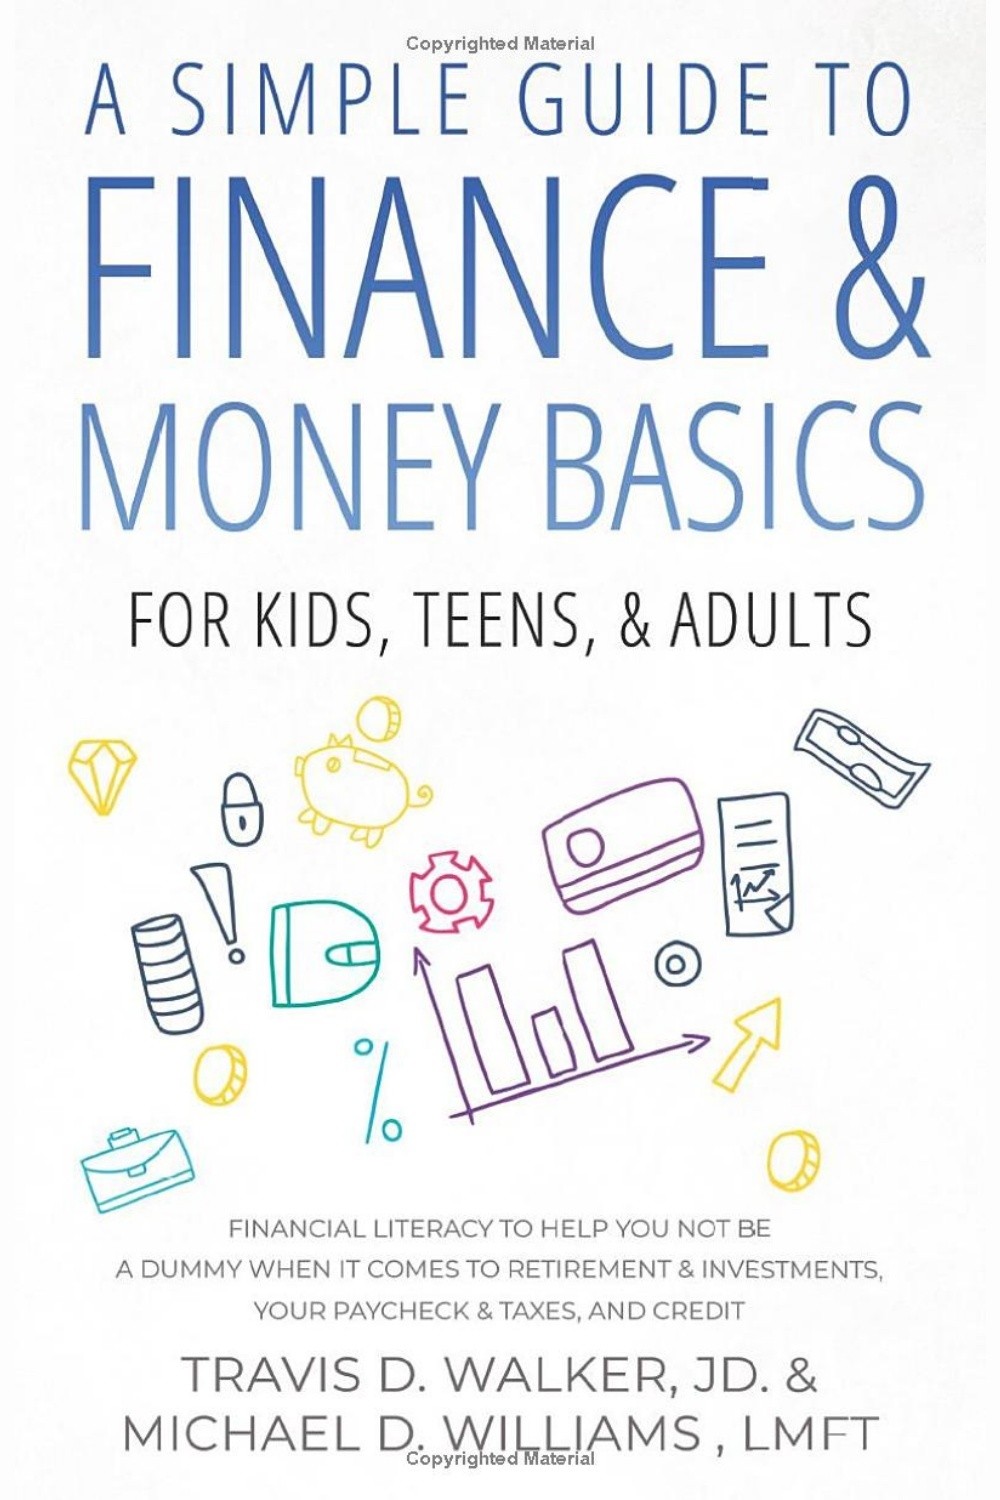 A Simple Guide To Finance & Money Basics